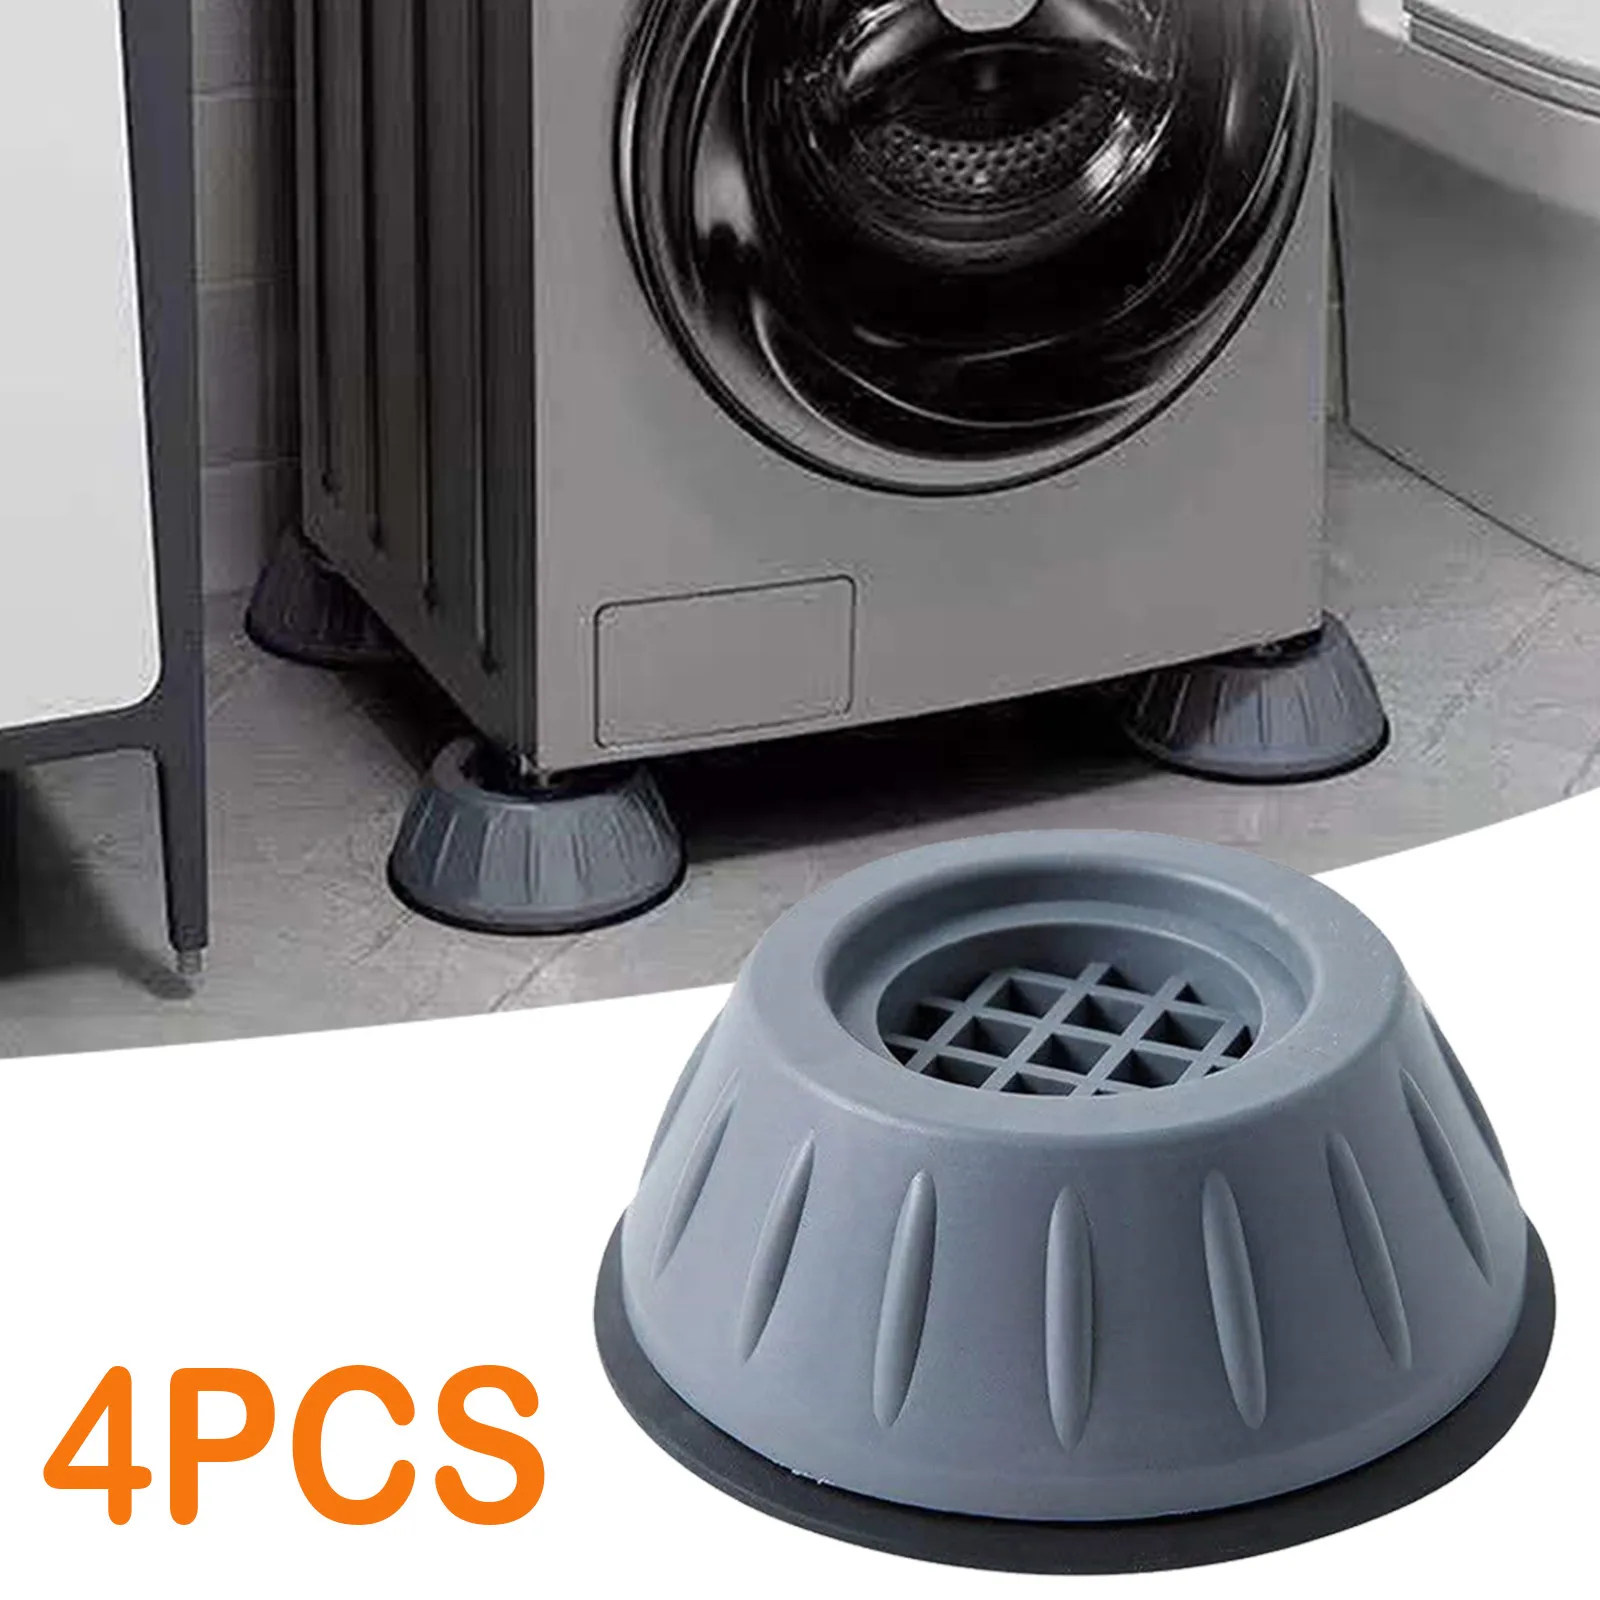 4pc Anti Vibration Pads for Washing Machine Prevent Your Washer and Dryer... 